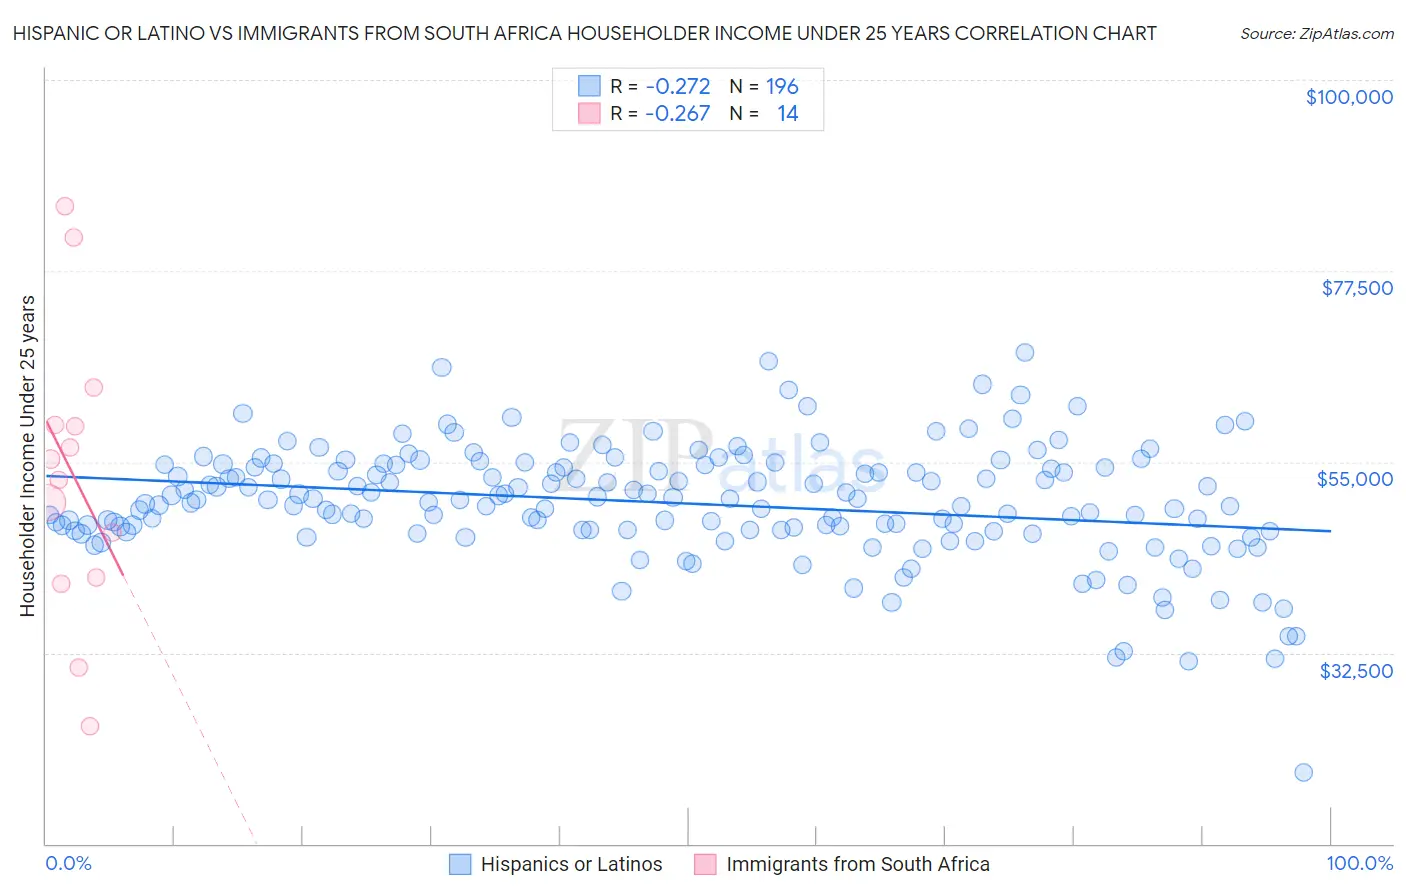 Hispanic or Latino vs Immigrants from South Africa Householder Income Under 25 years